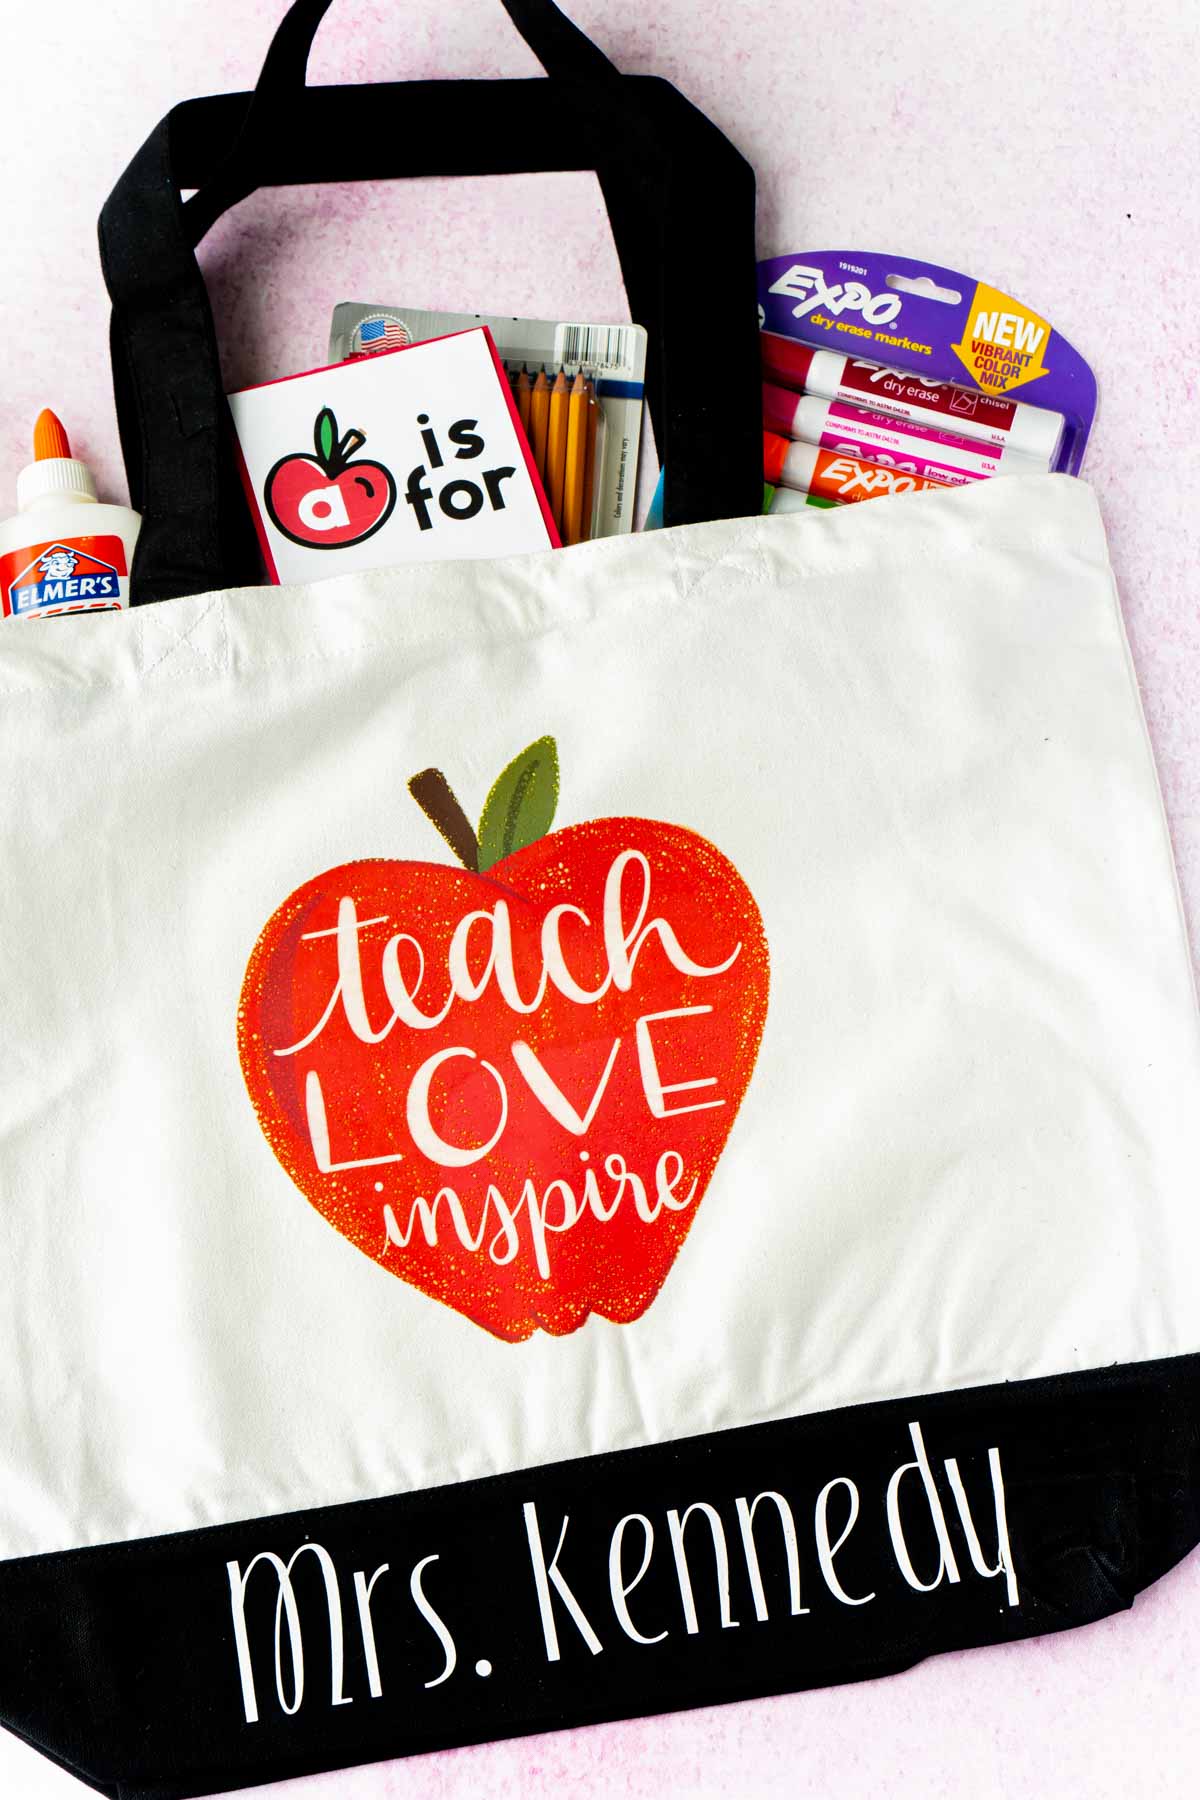 Kid-Colored Tote Bags with Cricut Explore Air 2 - An Easy DIY Holiday Gift!